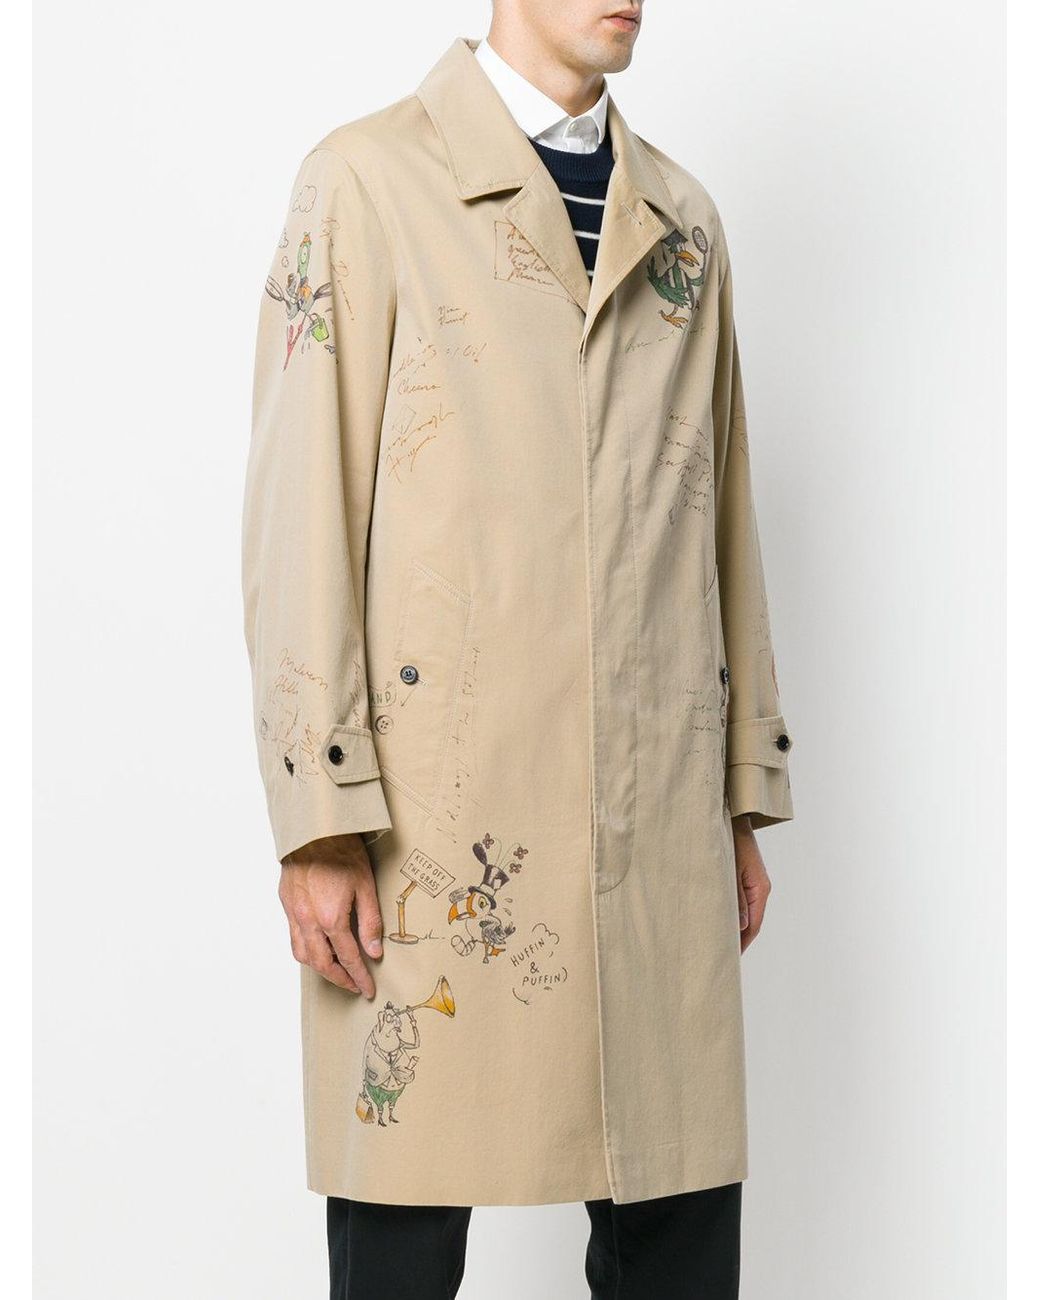 Burberry Cotton Sketch Print Tropical Trench Coat in Natural for Men | Lyst